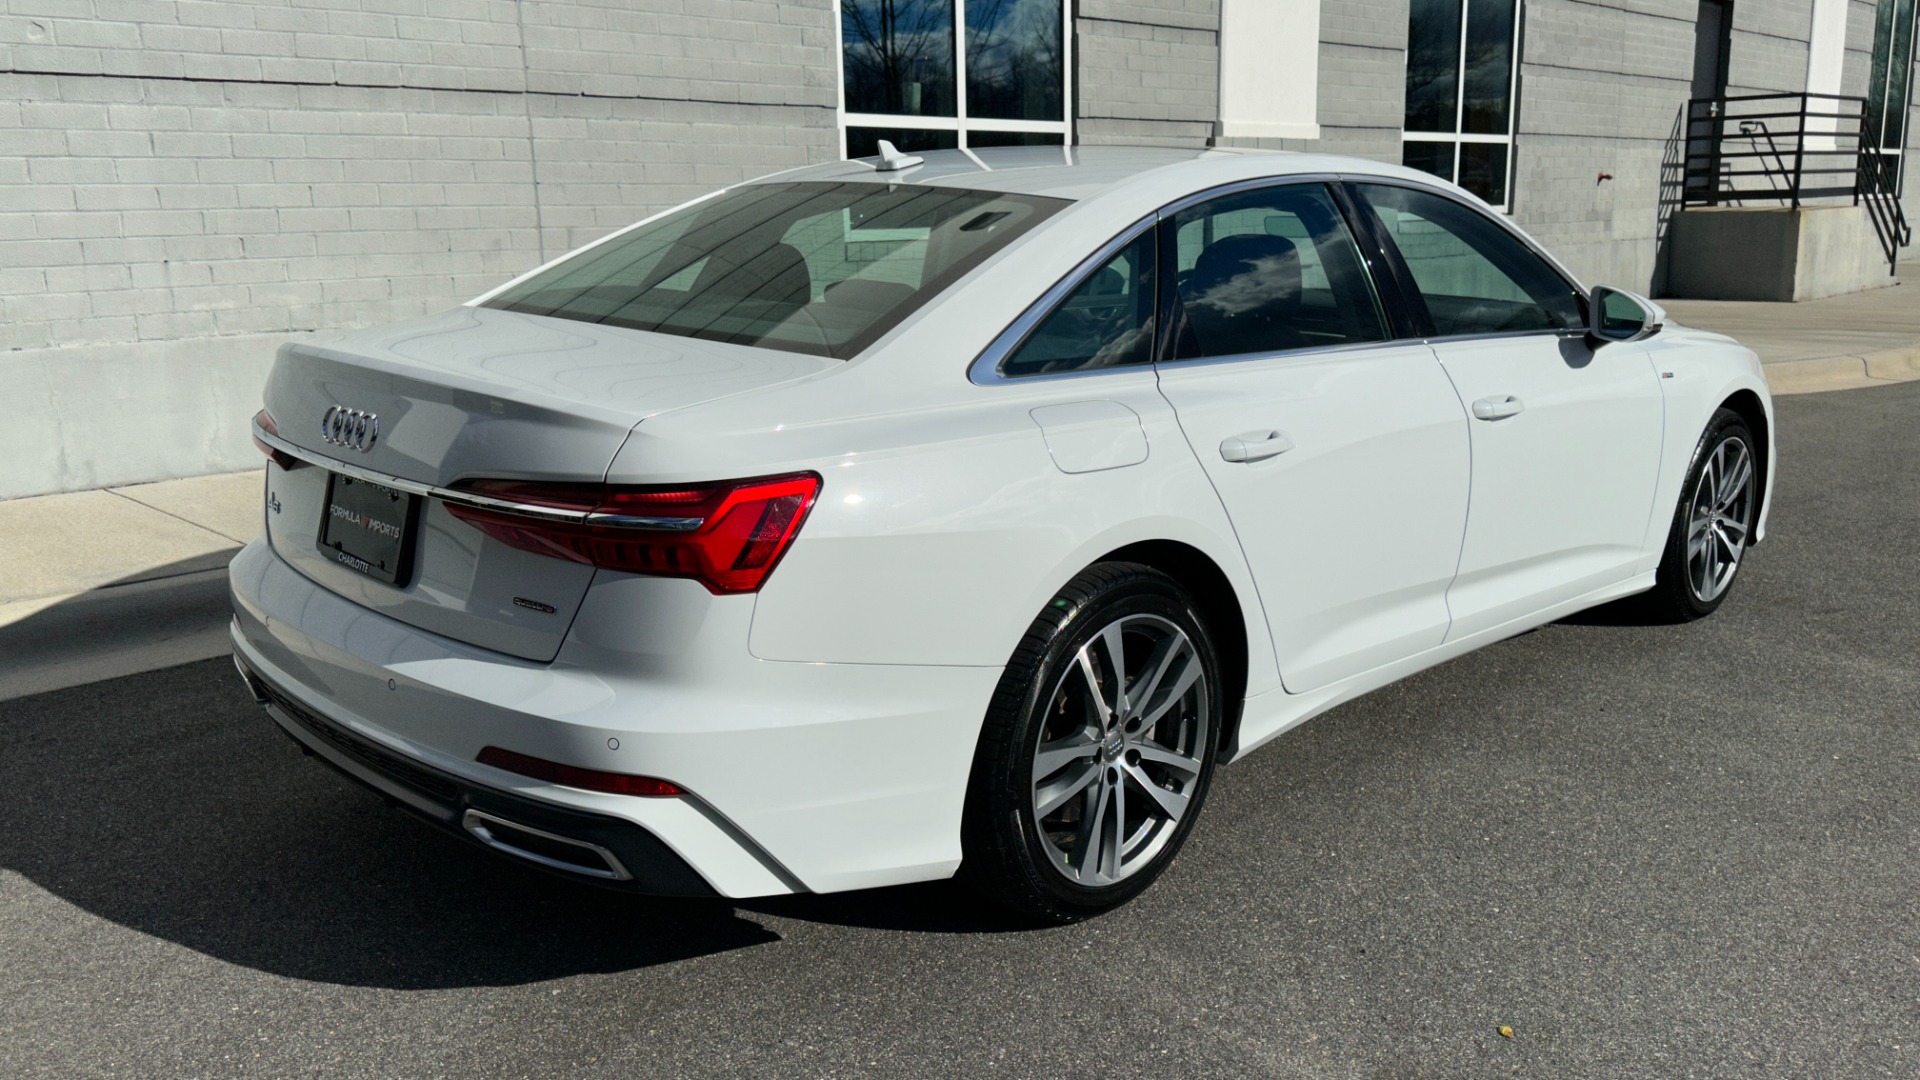 Used 2019 Audi A6 PREMIUM / COLD WEATHER PKG / CONVENIENCE PKG / INTERIOR PROTECTION PKG for sale $36,995 at Formula Imports in Charlotte NC 28227 7